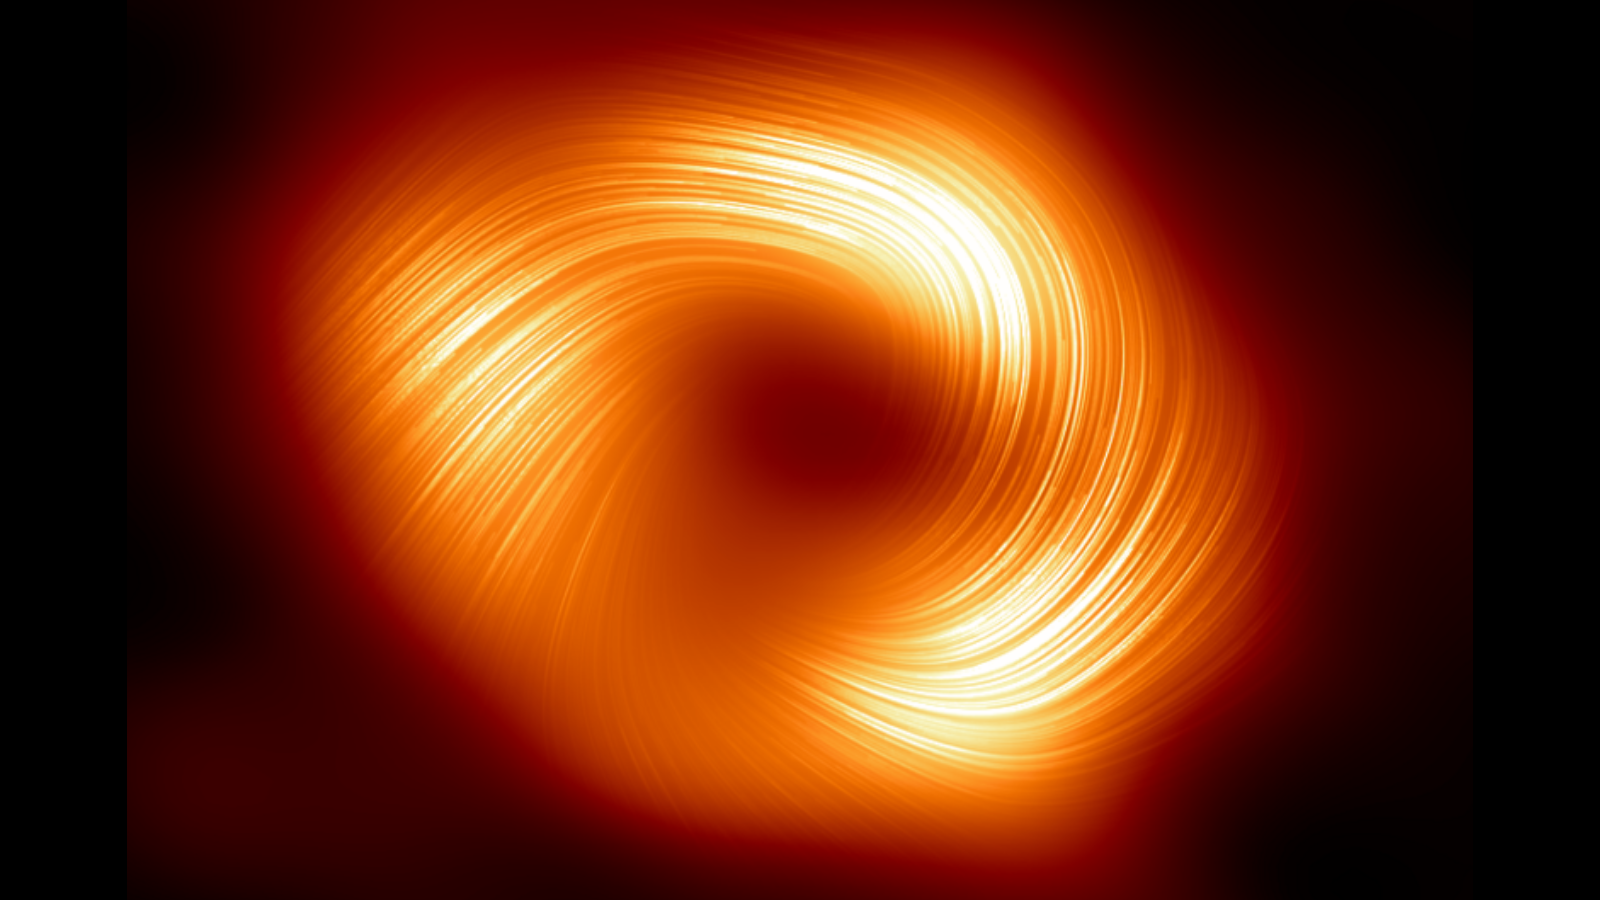 A streaked orange and white donut-shaped structure in front of a black background.